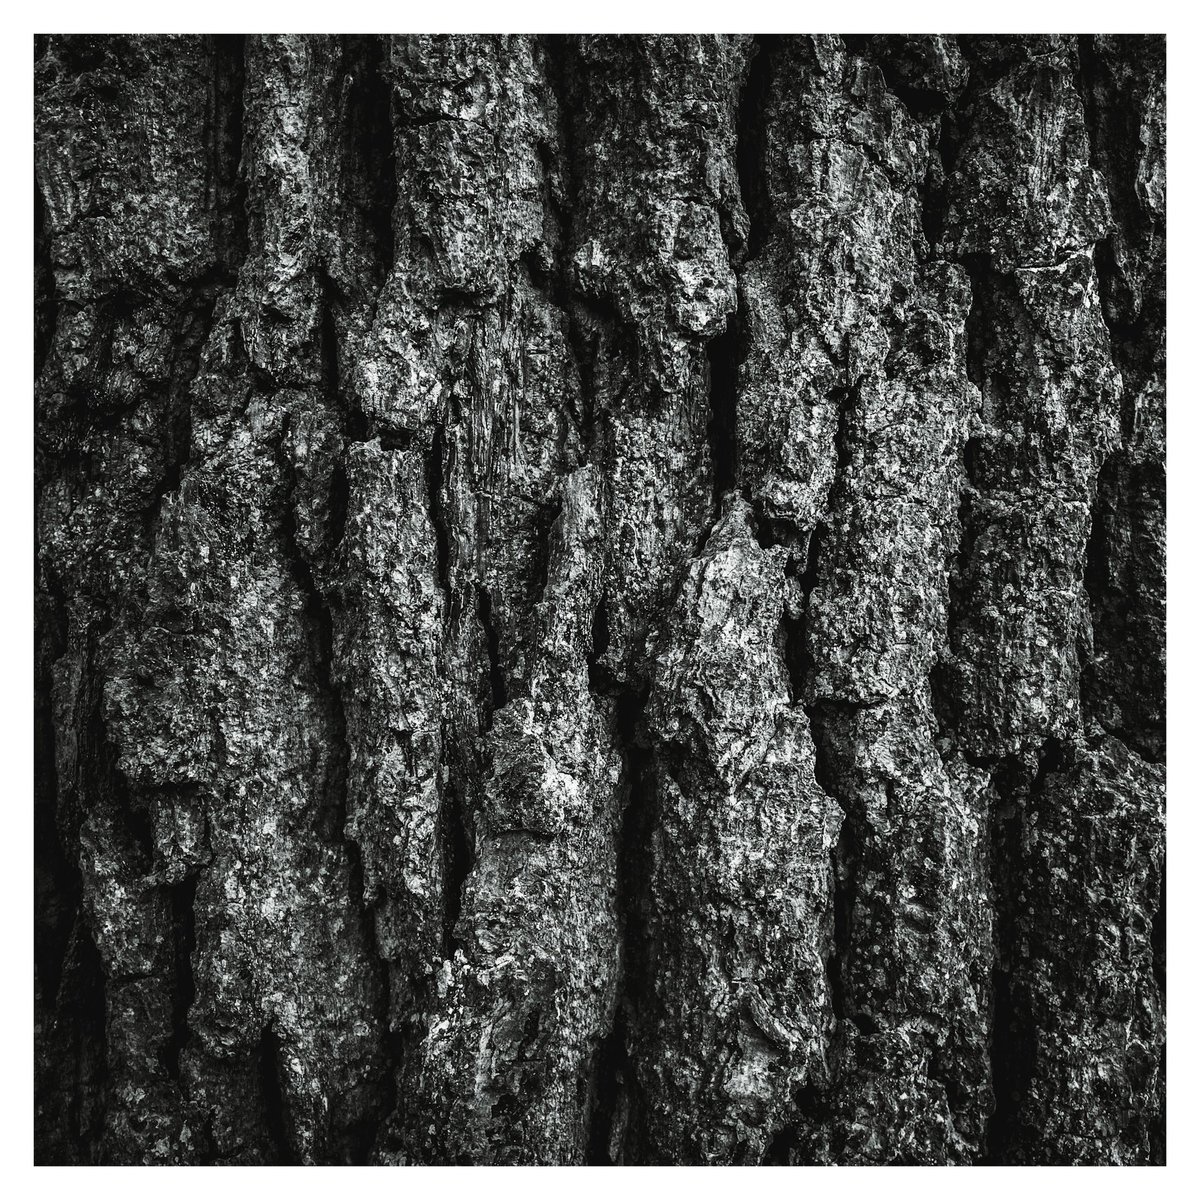 [ Weekend 17 ] Good morning frens ☕️ Tree bark details (oak) as inspired by recent shots of @thebatchpatch1 To join in just post your macro/closeup shot 📷 on weekends, using hashtag #bnw_macro I will RT every post I can find #blackandwhitephotography #treephotography